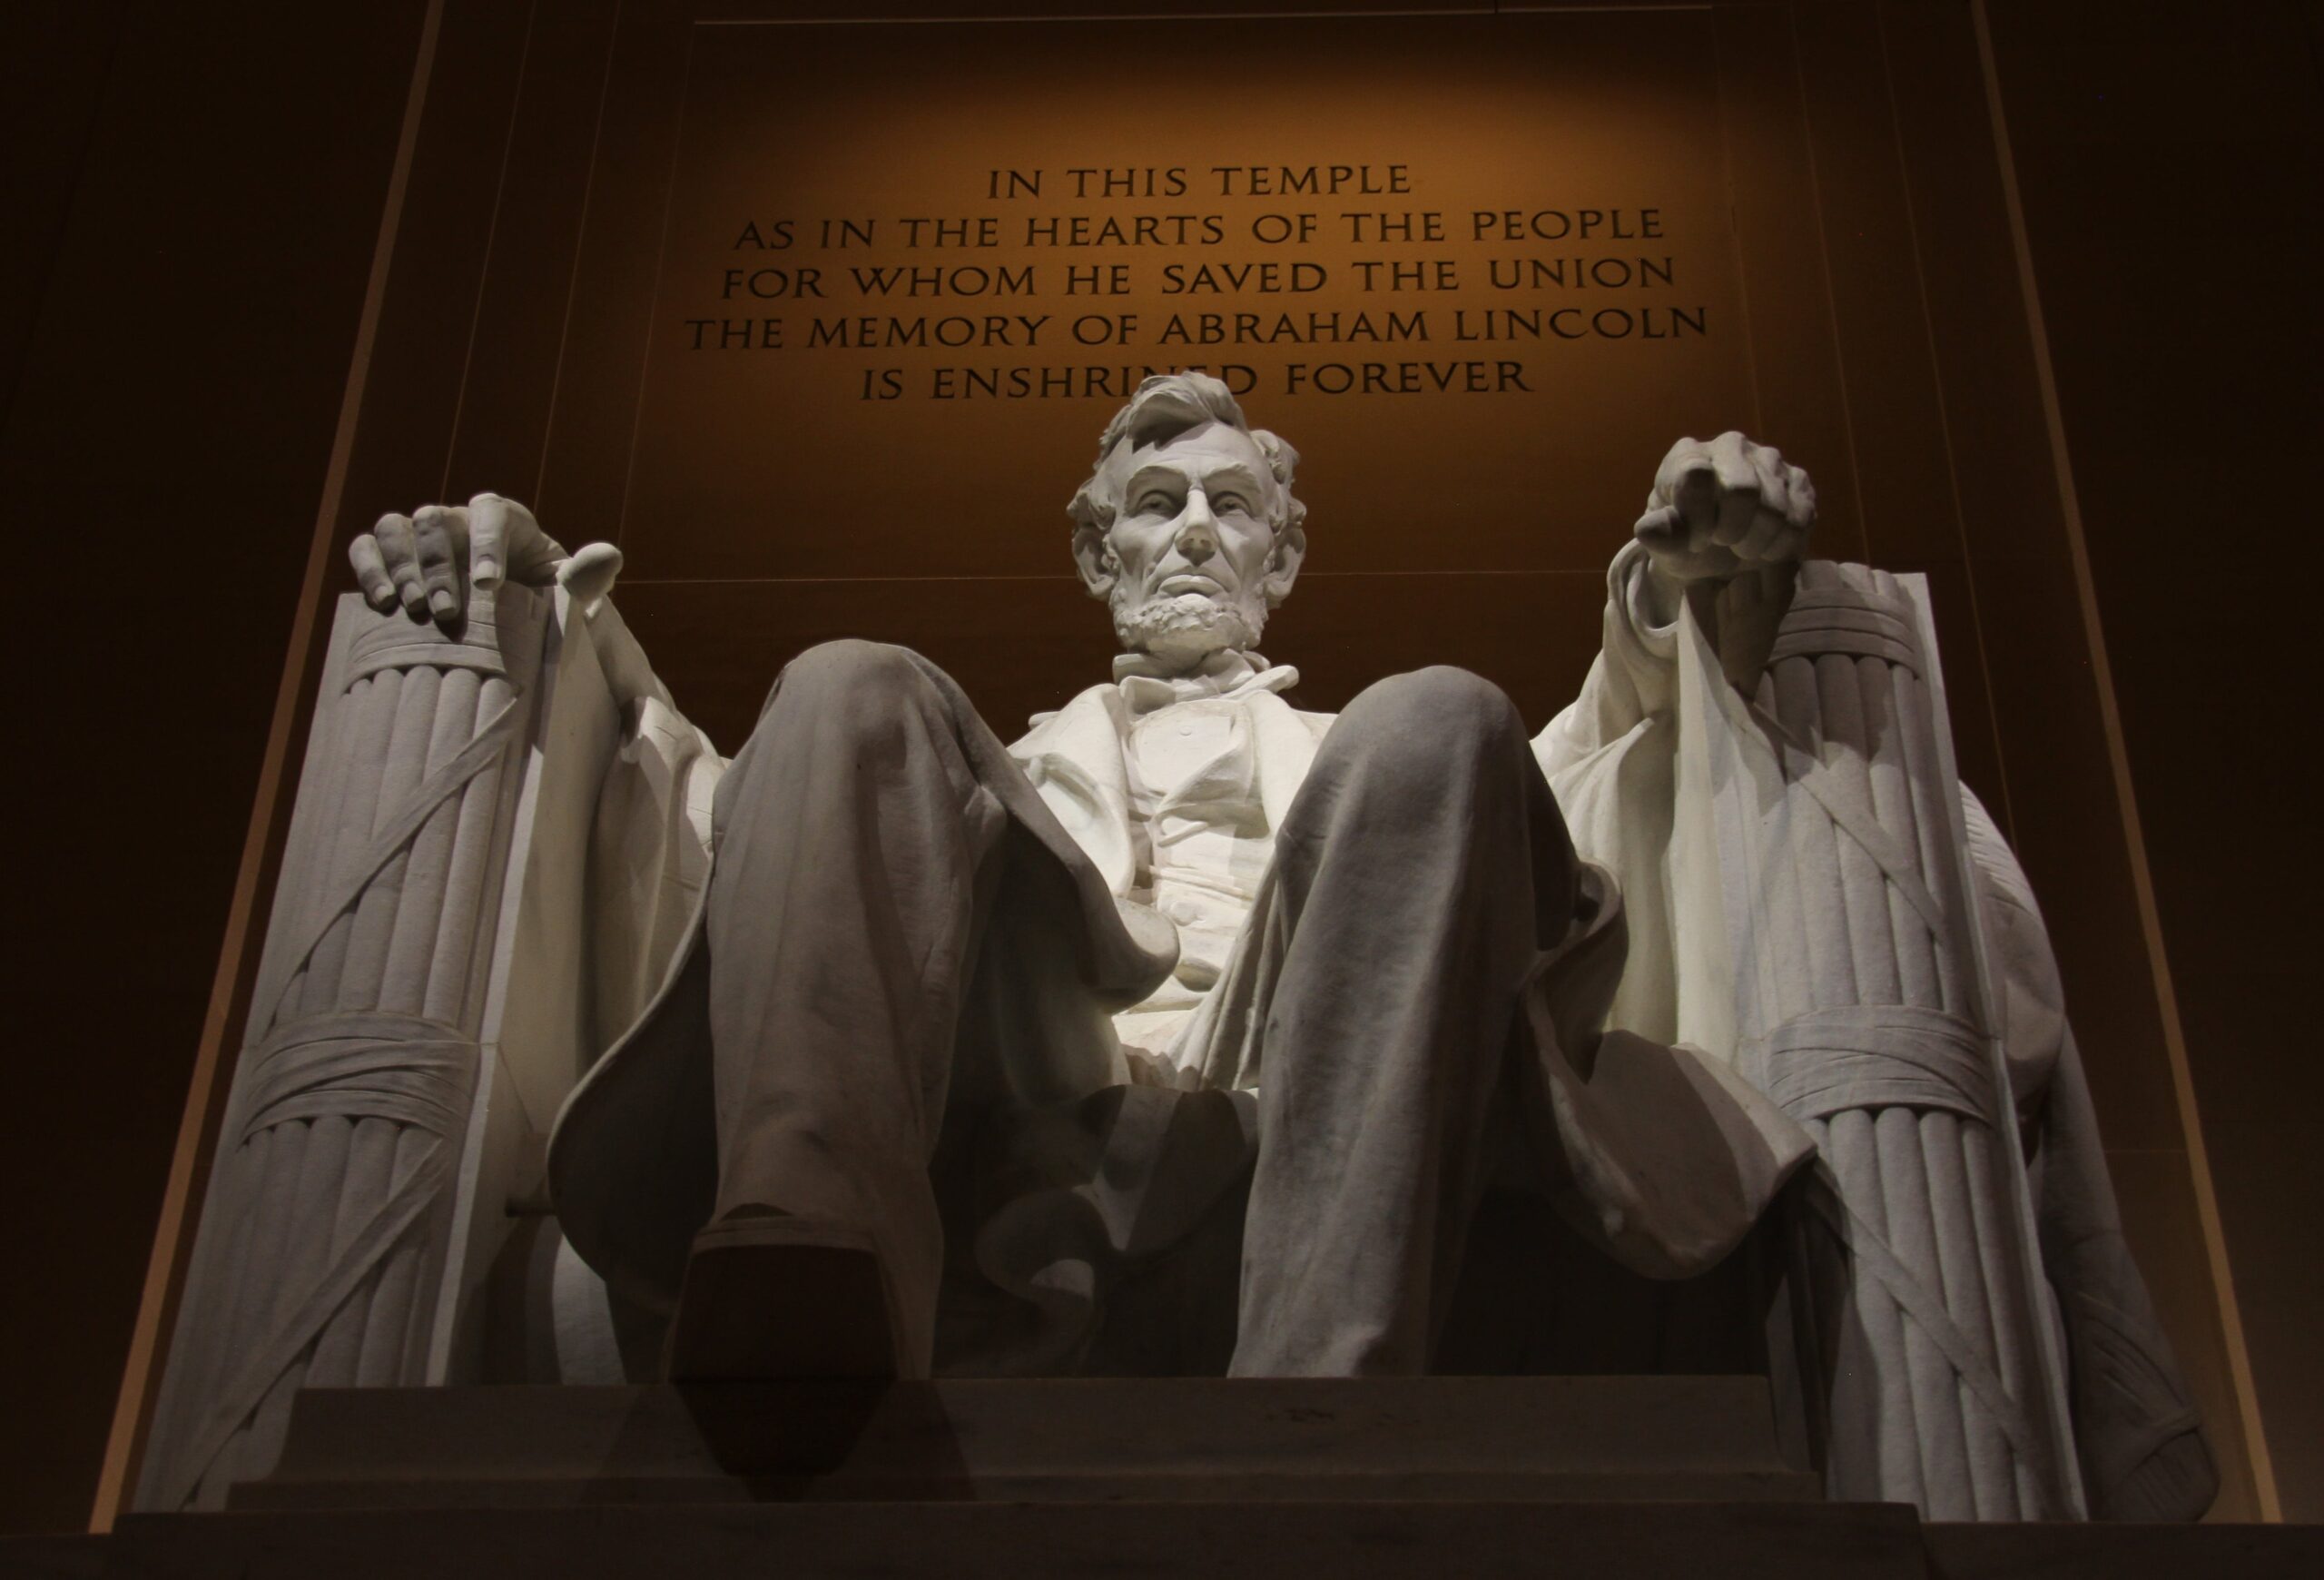 In the Bible, Lincoln discovered freedom from slavery, despair, and death